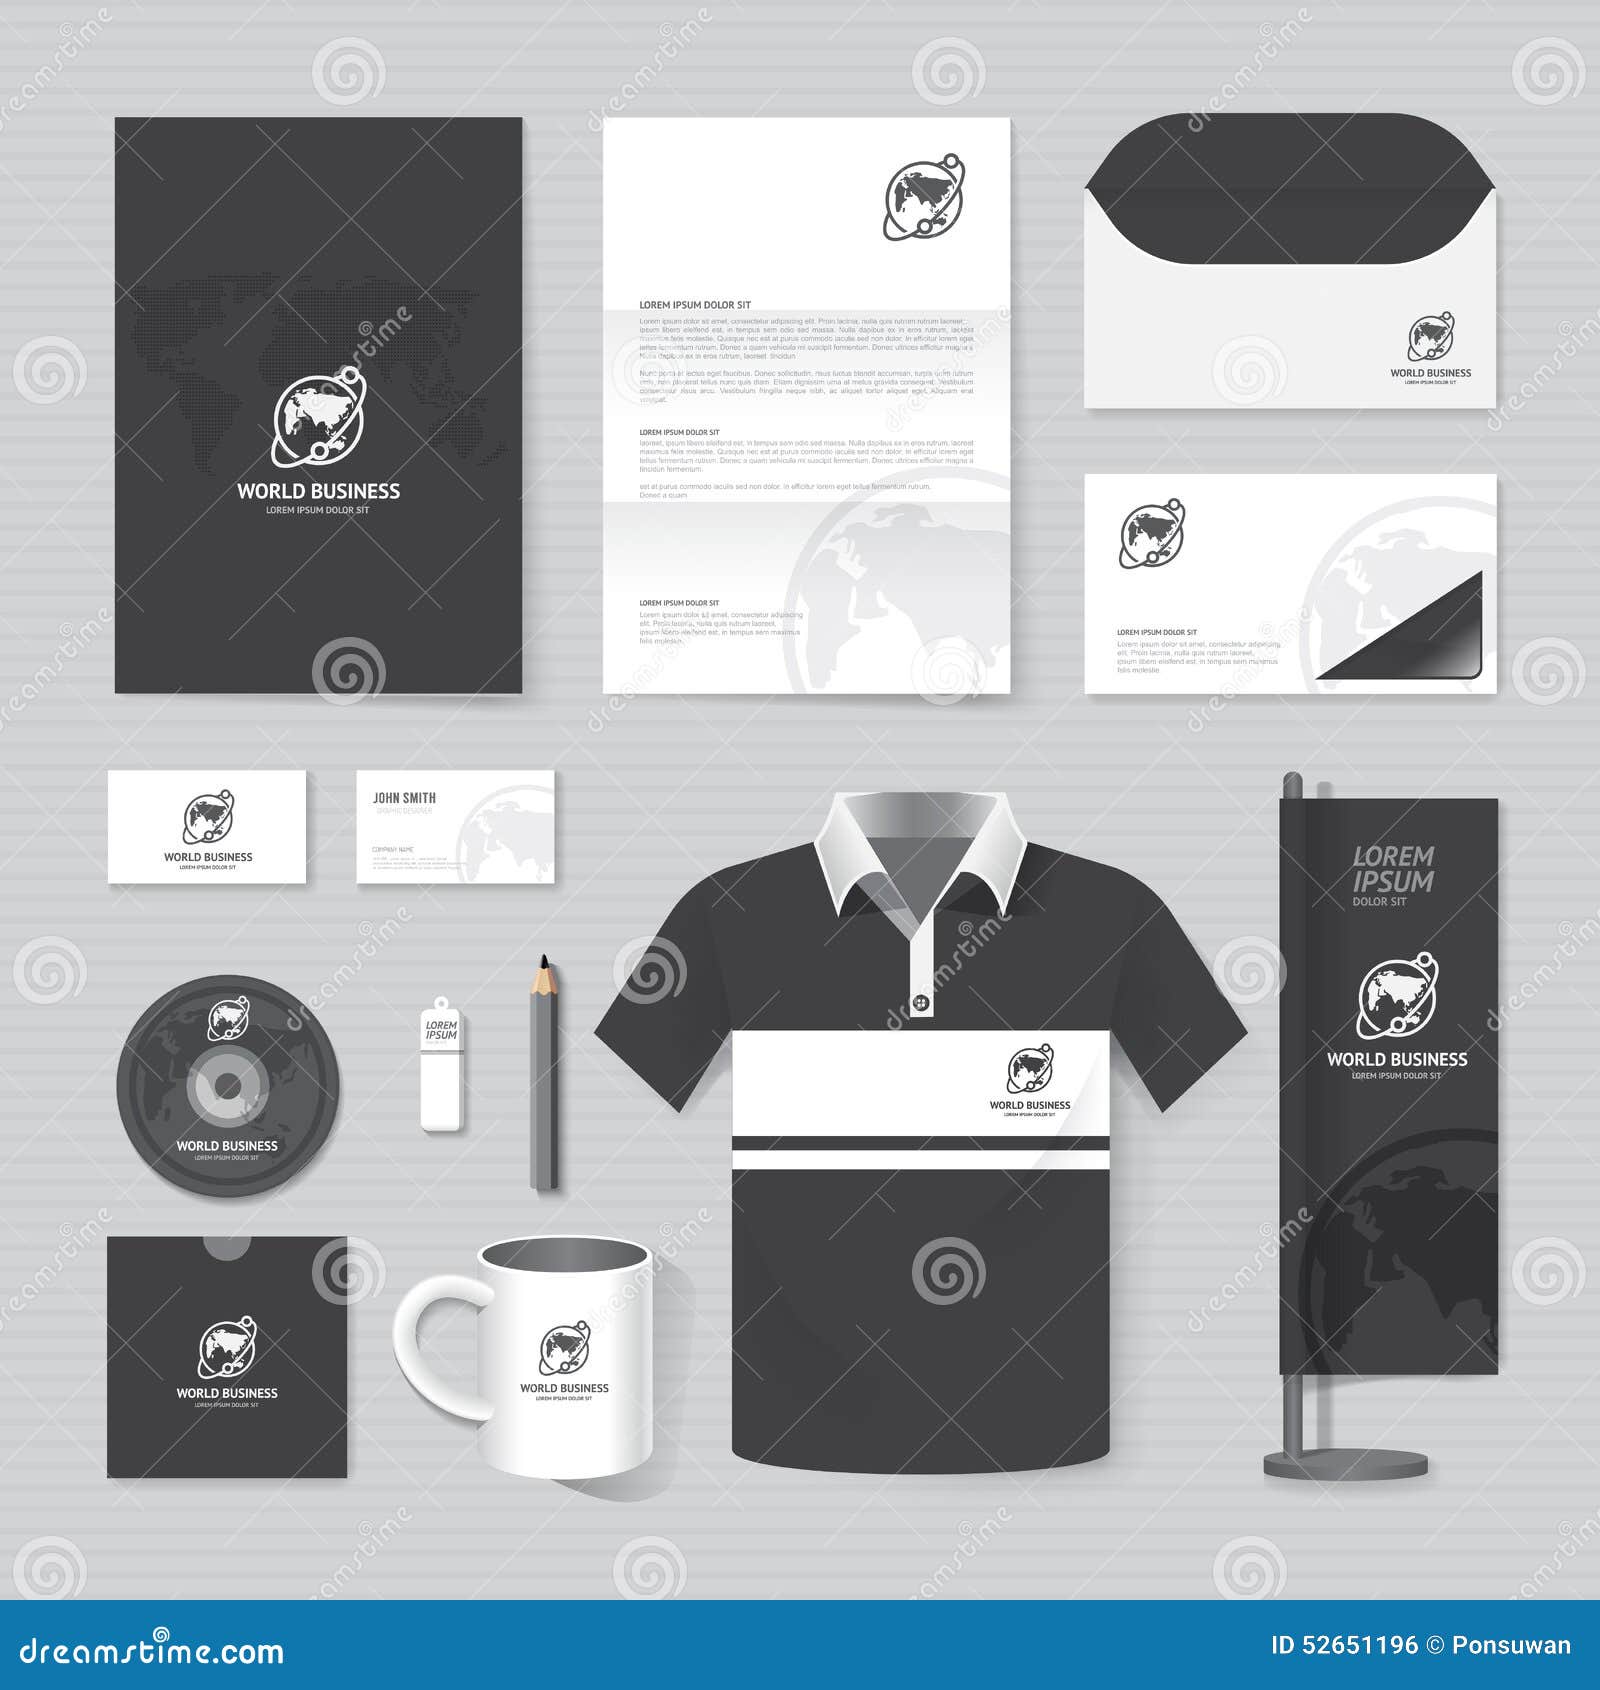 T-shirt printing business flyer Template